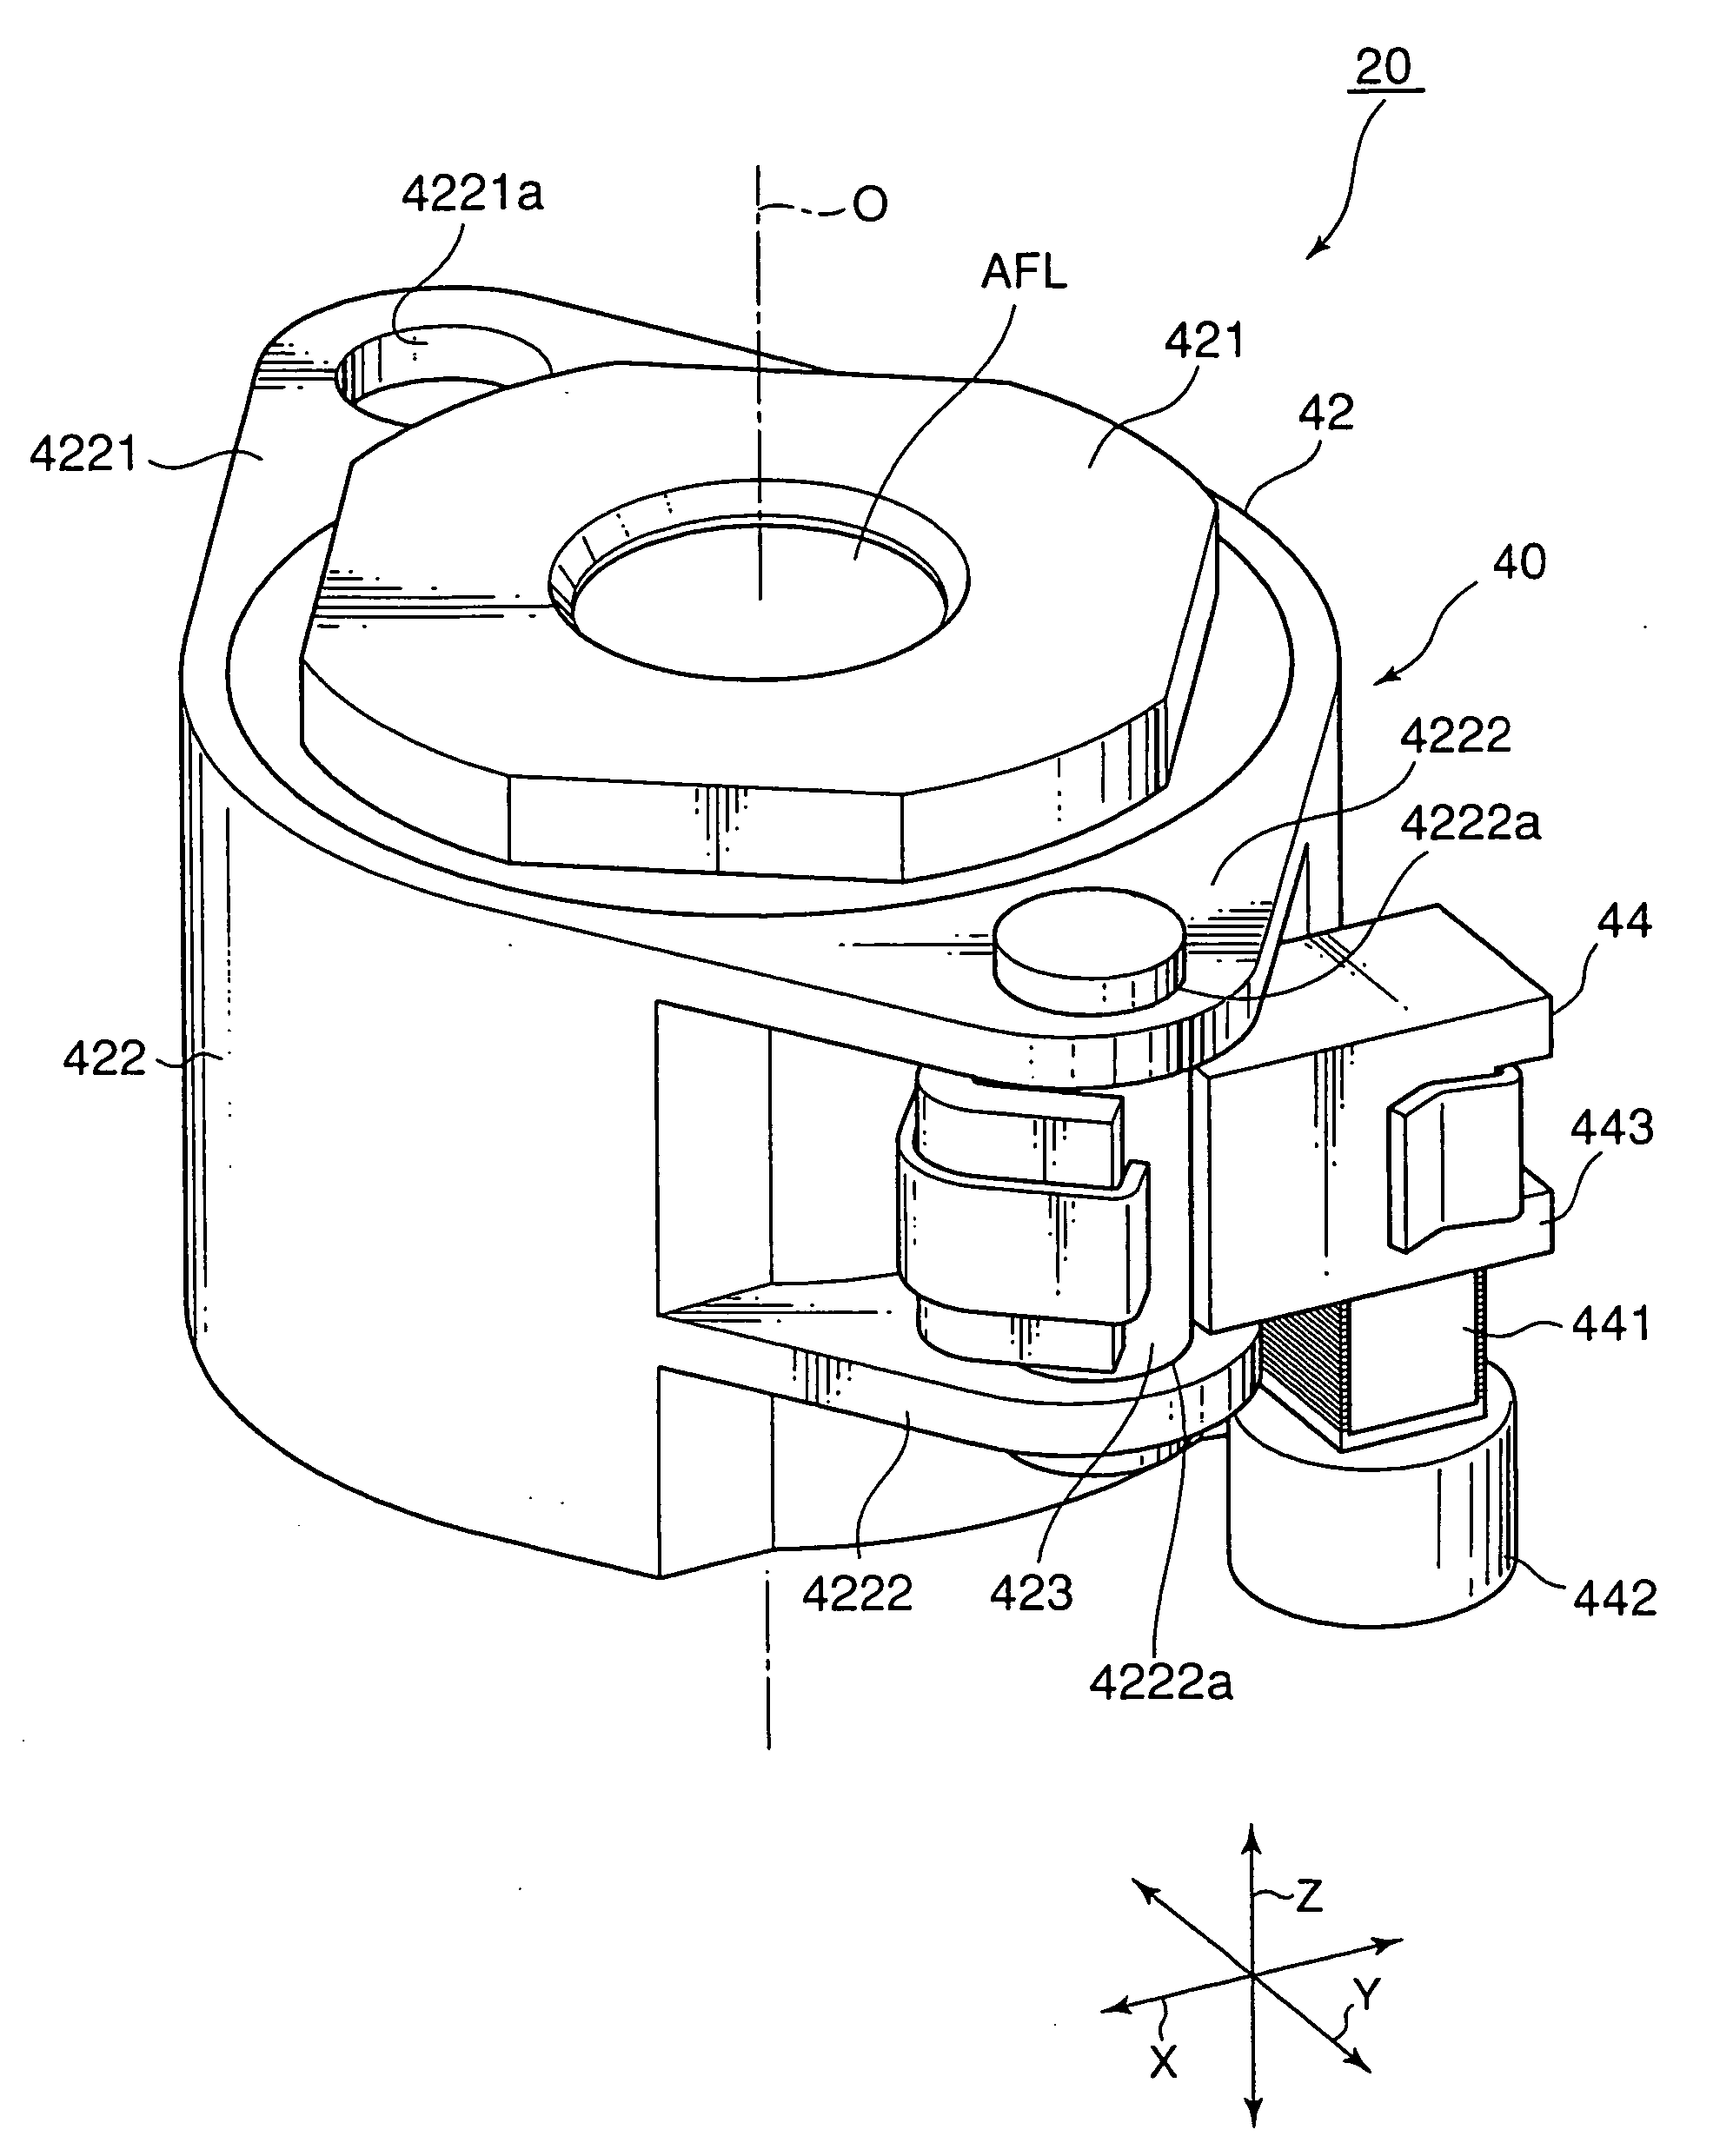 Driving device capable of transferring vibrations generated by an electro-mechanical transducer to a vibration friction portion with a high degree of efficiency